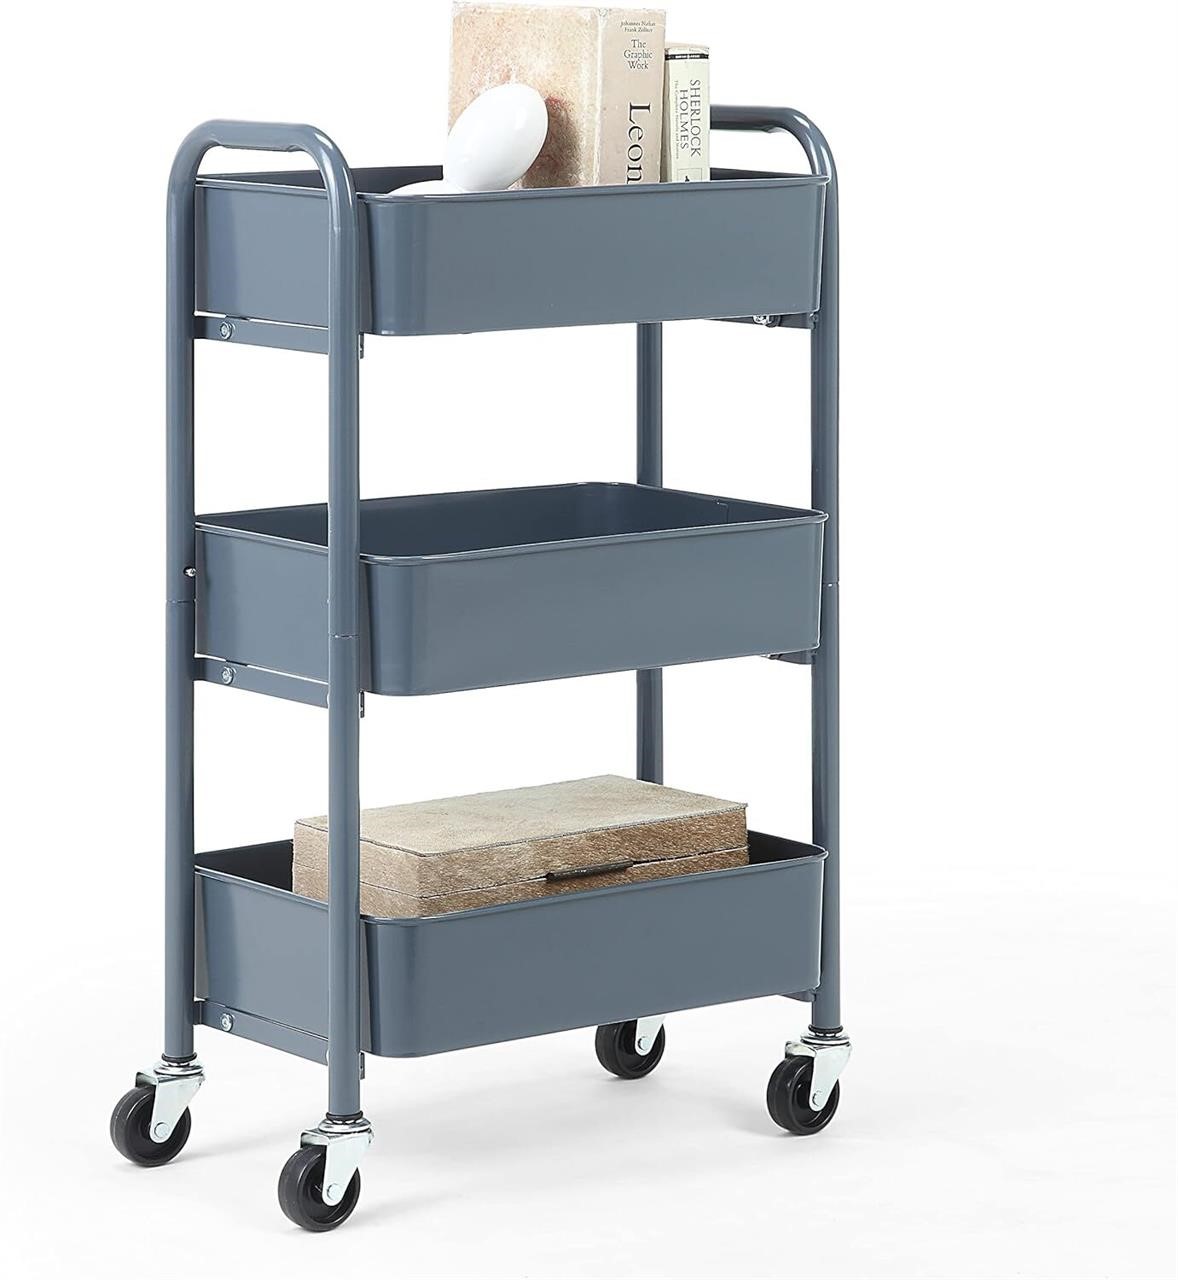 SunnyPoint Cart Blue (15.5x26.8x10.27 Inches)